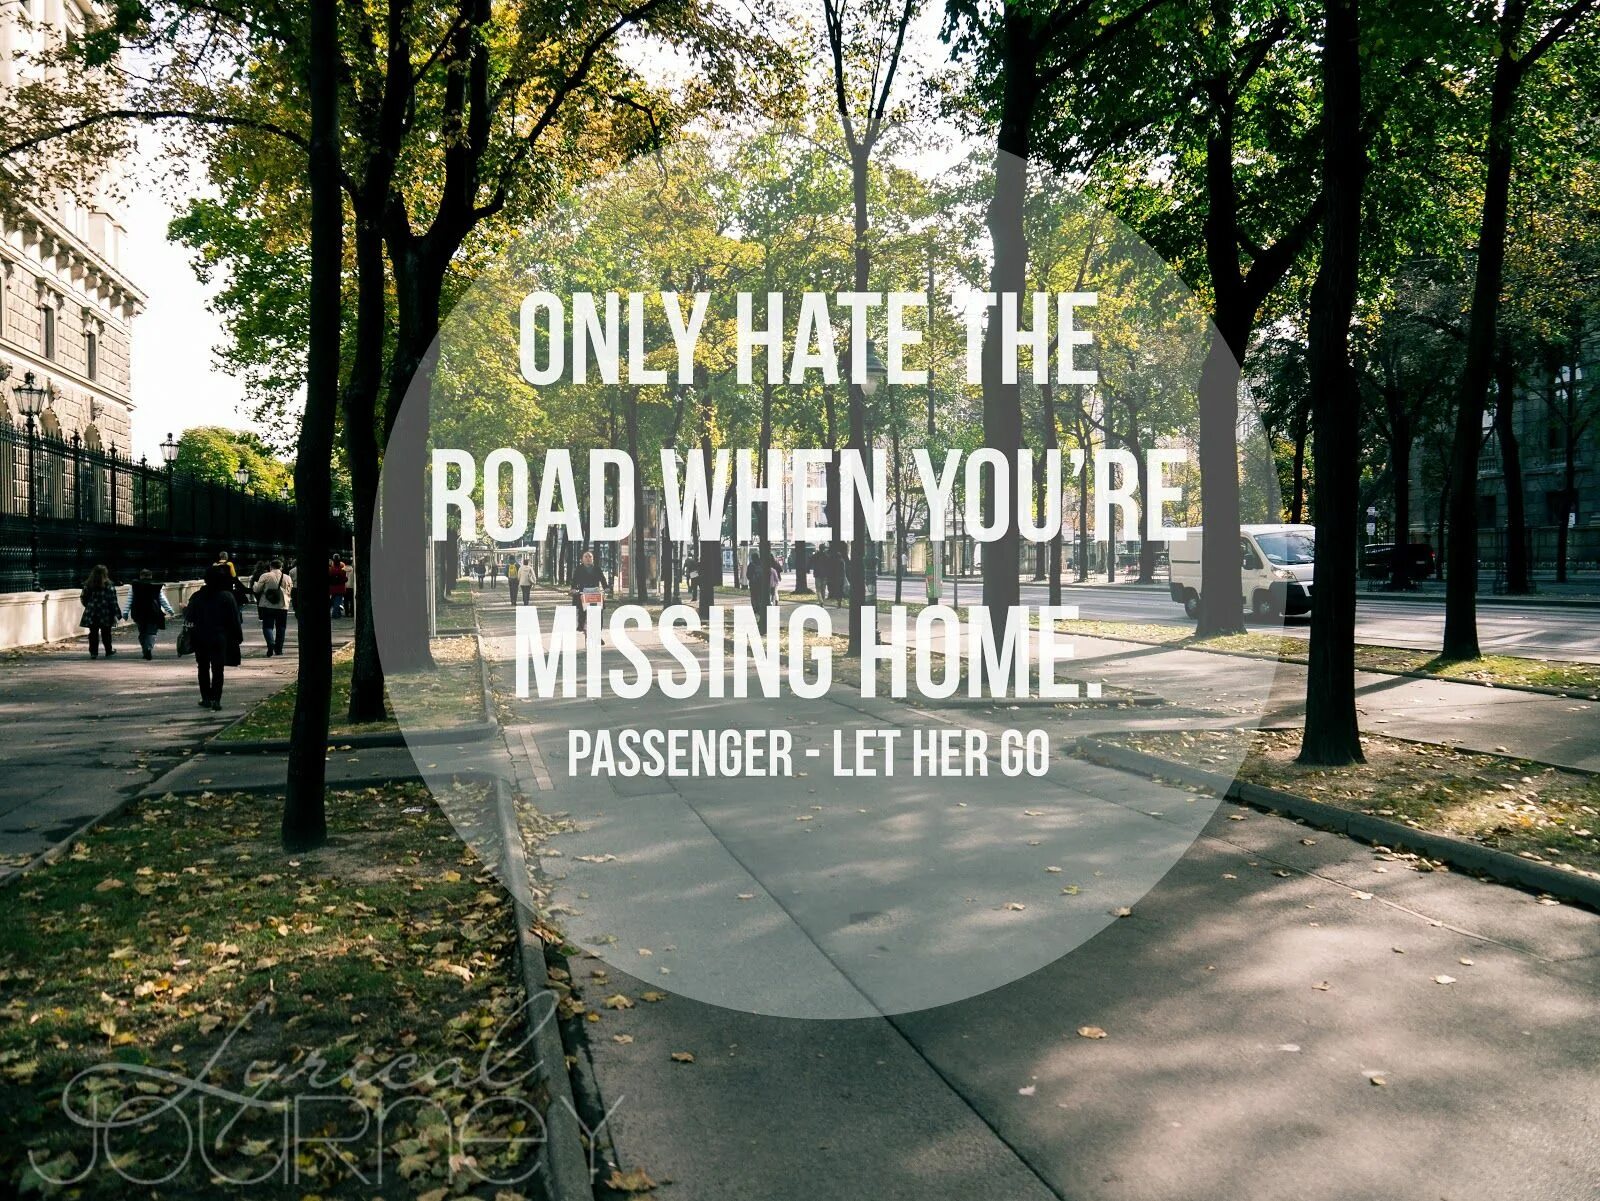 Let her go Passenger текст. Only hate. Hate the Road when you. Let her go Lyrics. Only hates